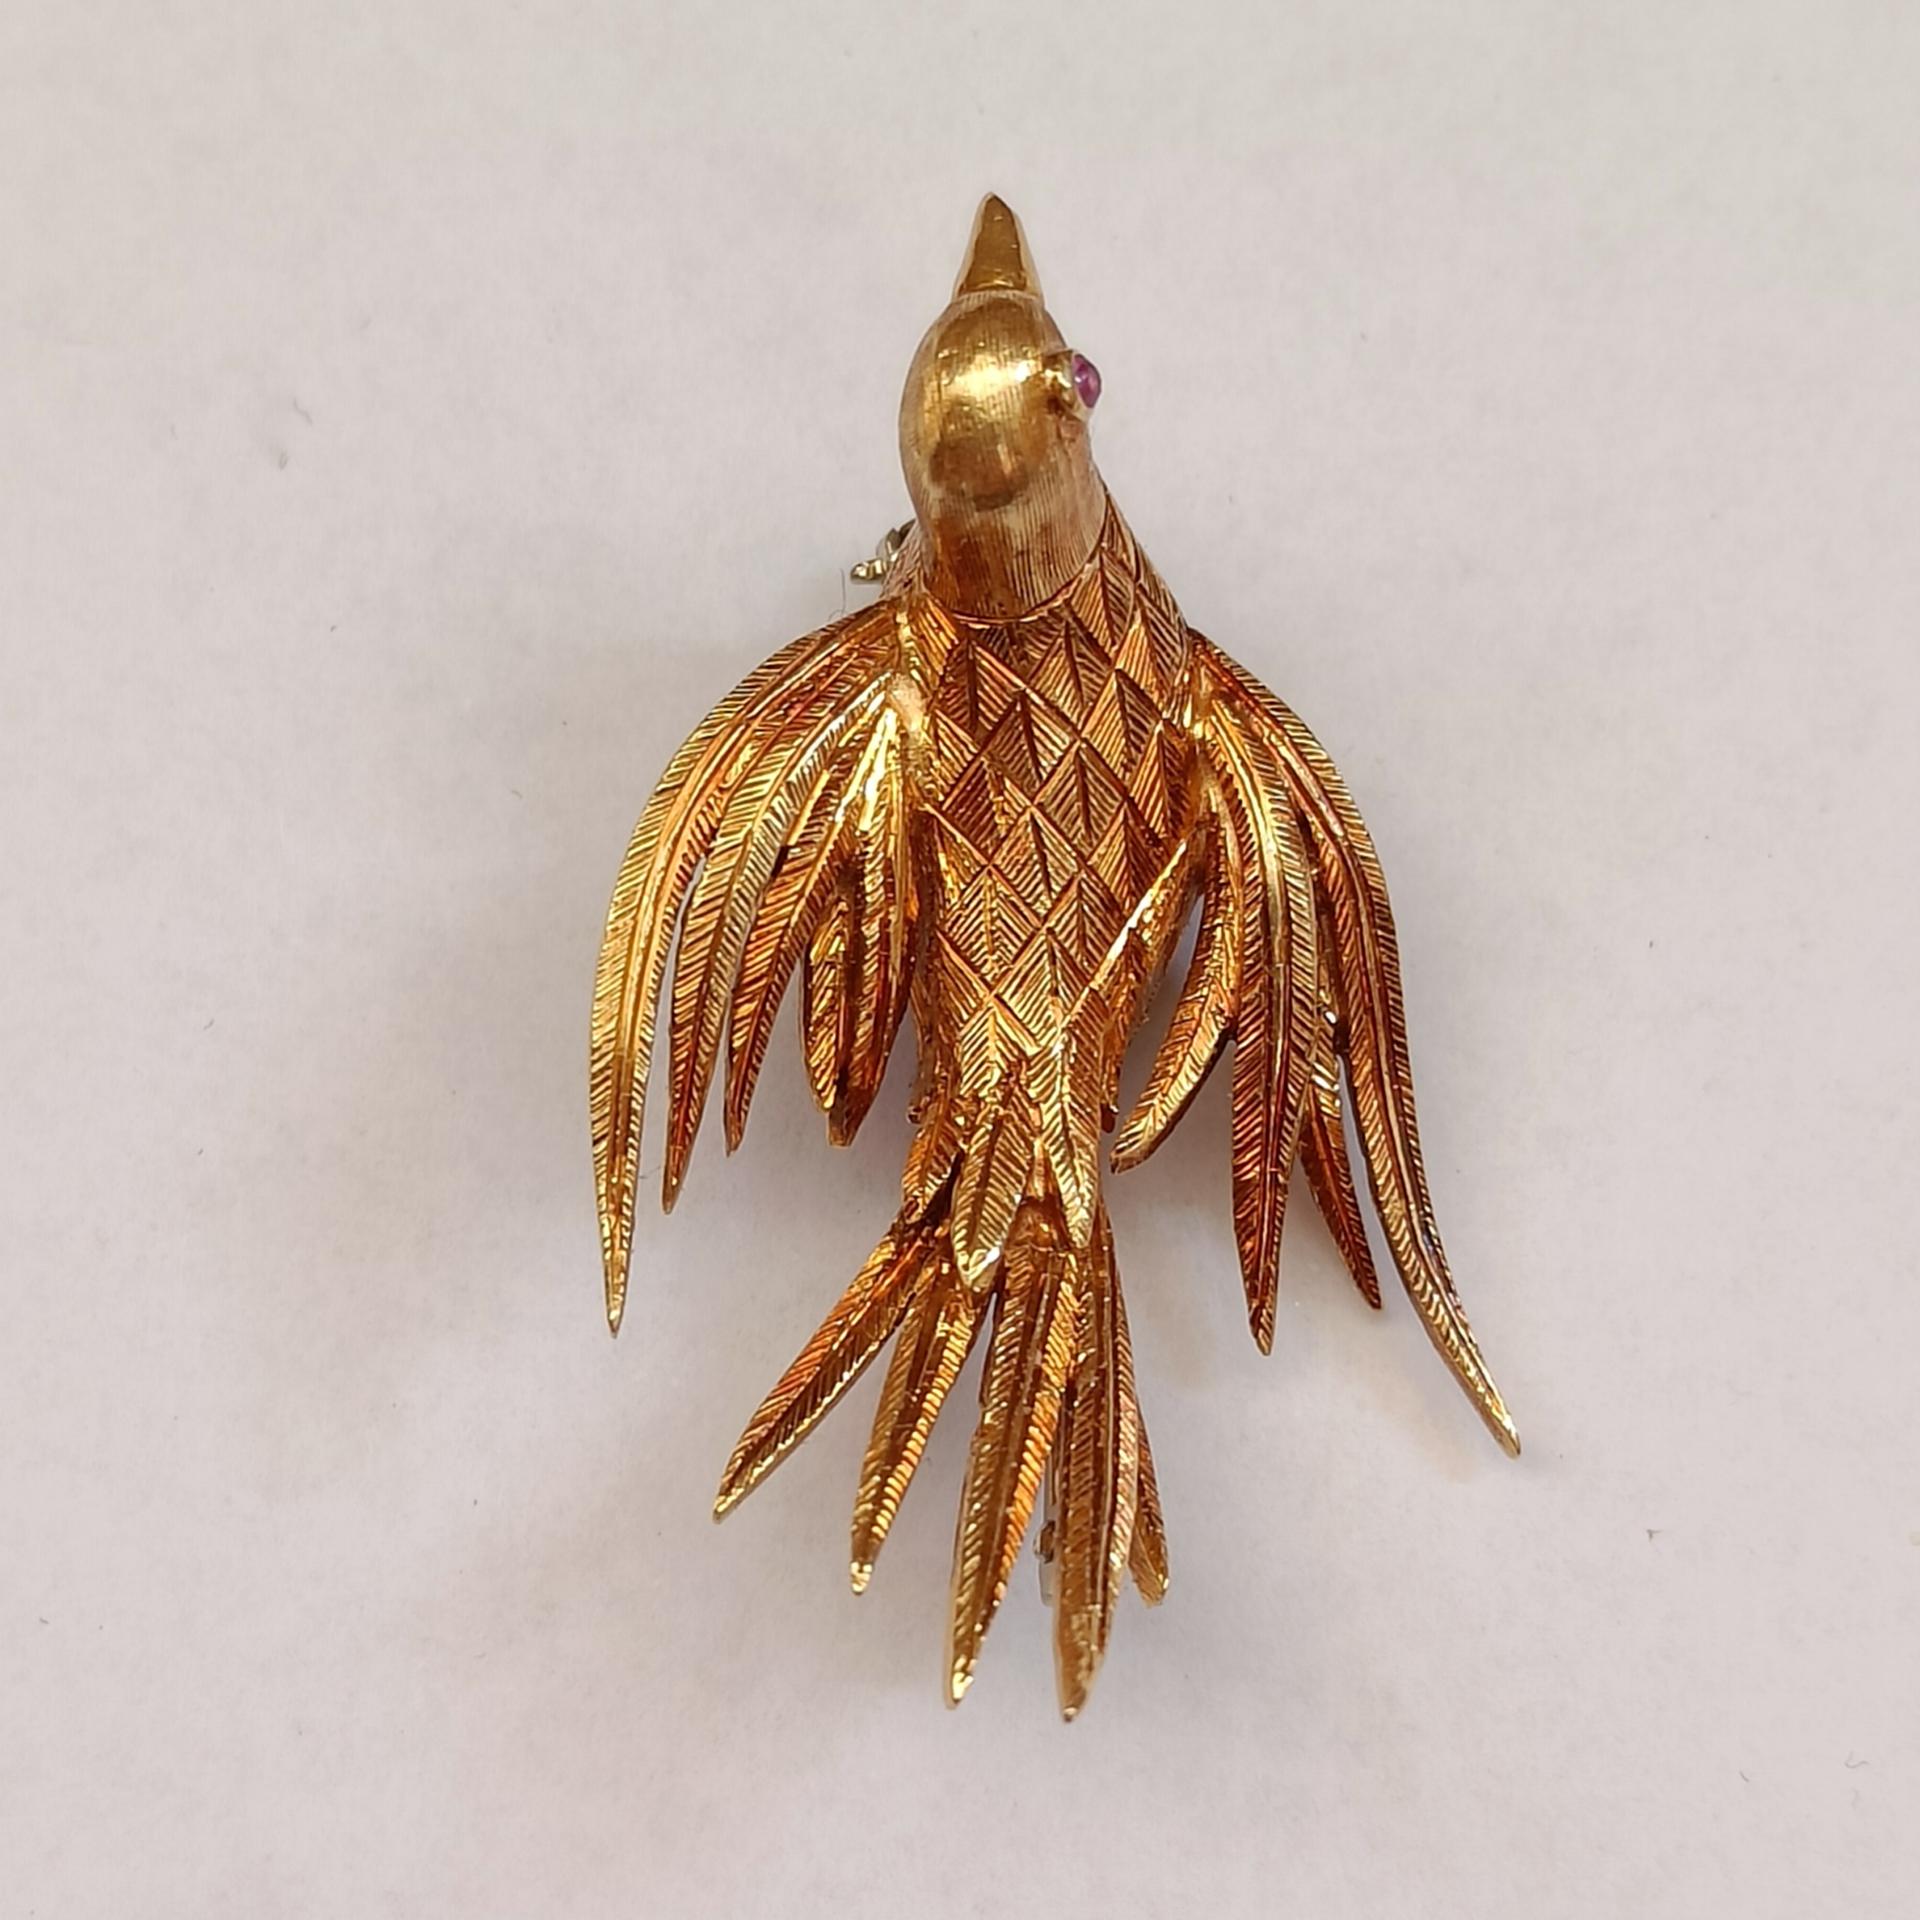 An 18 carat yellow gold brooch depicting a bird. Beautiful chiseled decorations all over the body. Pink gemstone as the eye. Stamped 750 and unidentified maker mark. Pin in white gold (stamped). Good condition.

Dimensions: 4x2.5 cm (approx)
Weight: